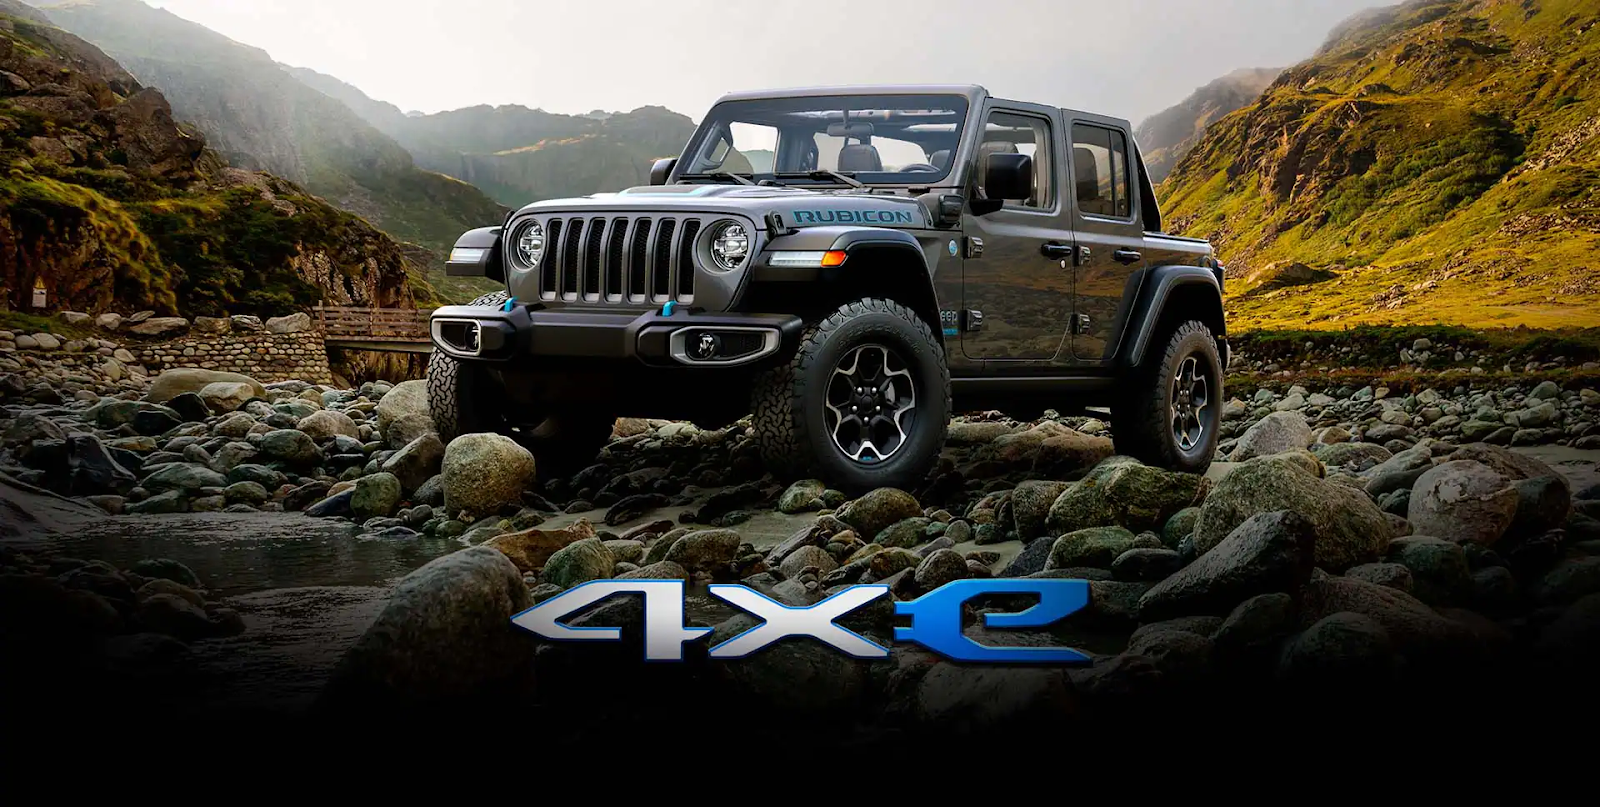 The New Jeep Wrangler 4xe The Trail Legend Goes Electric!